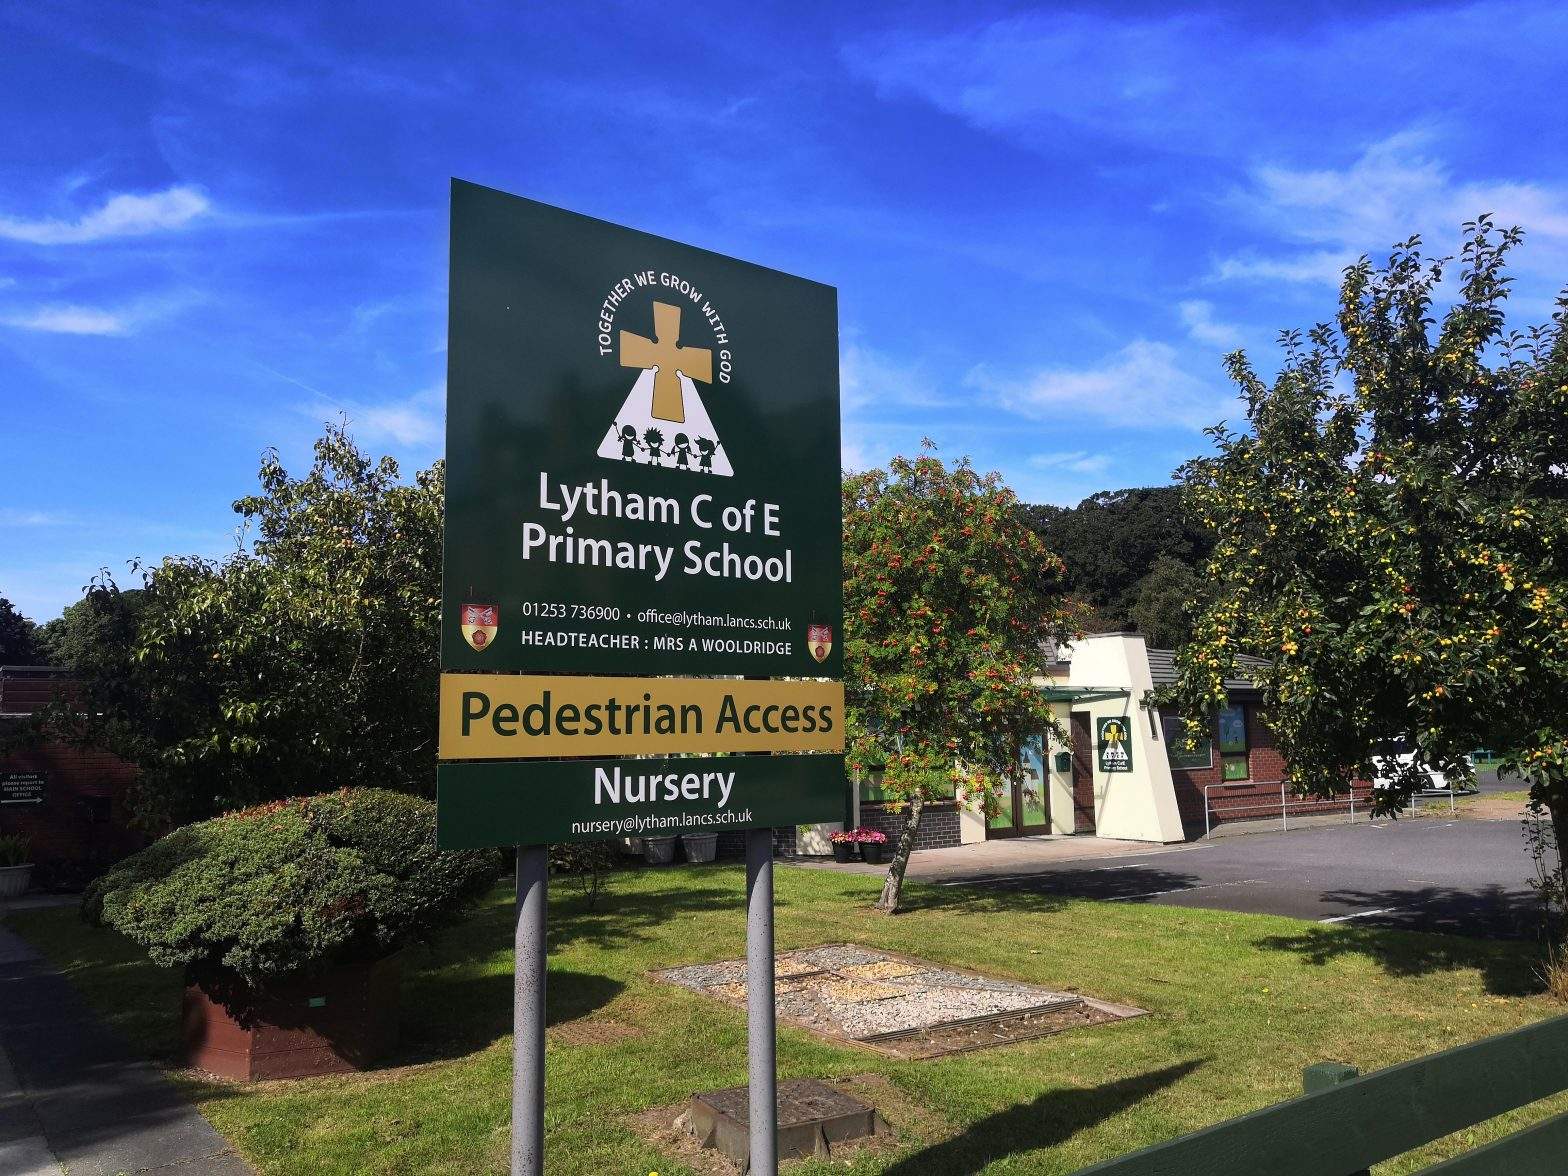 The sign outside Lytham C of E Primary school on a sunny day. The school can be seen in the background.